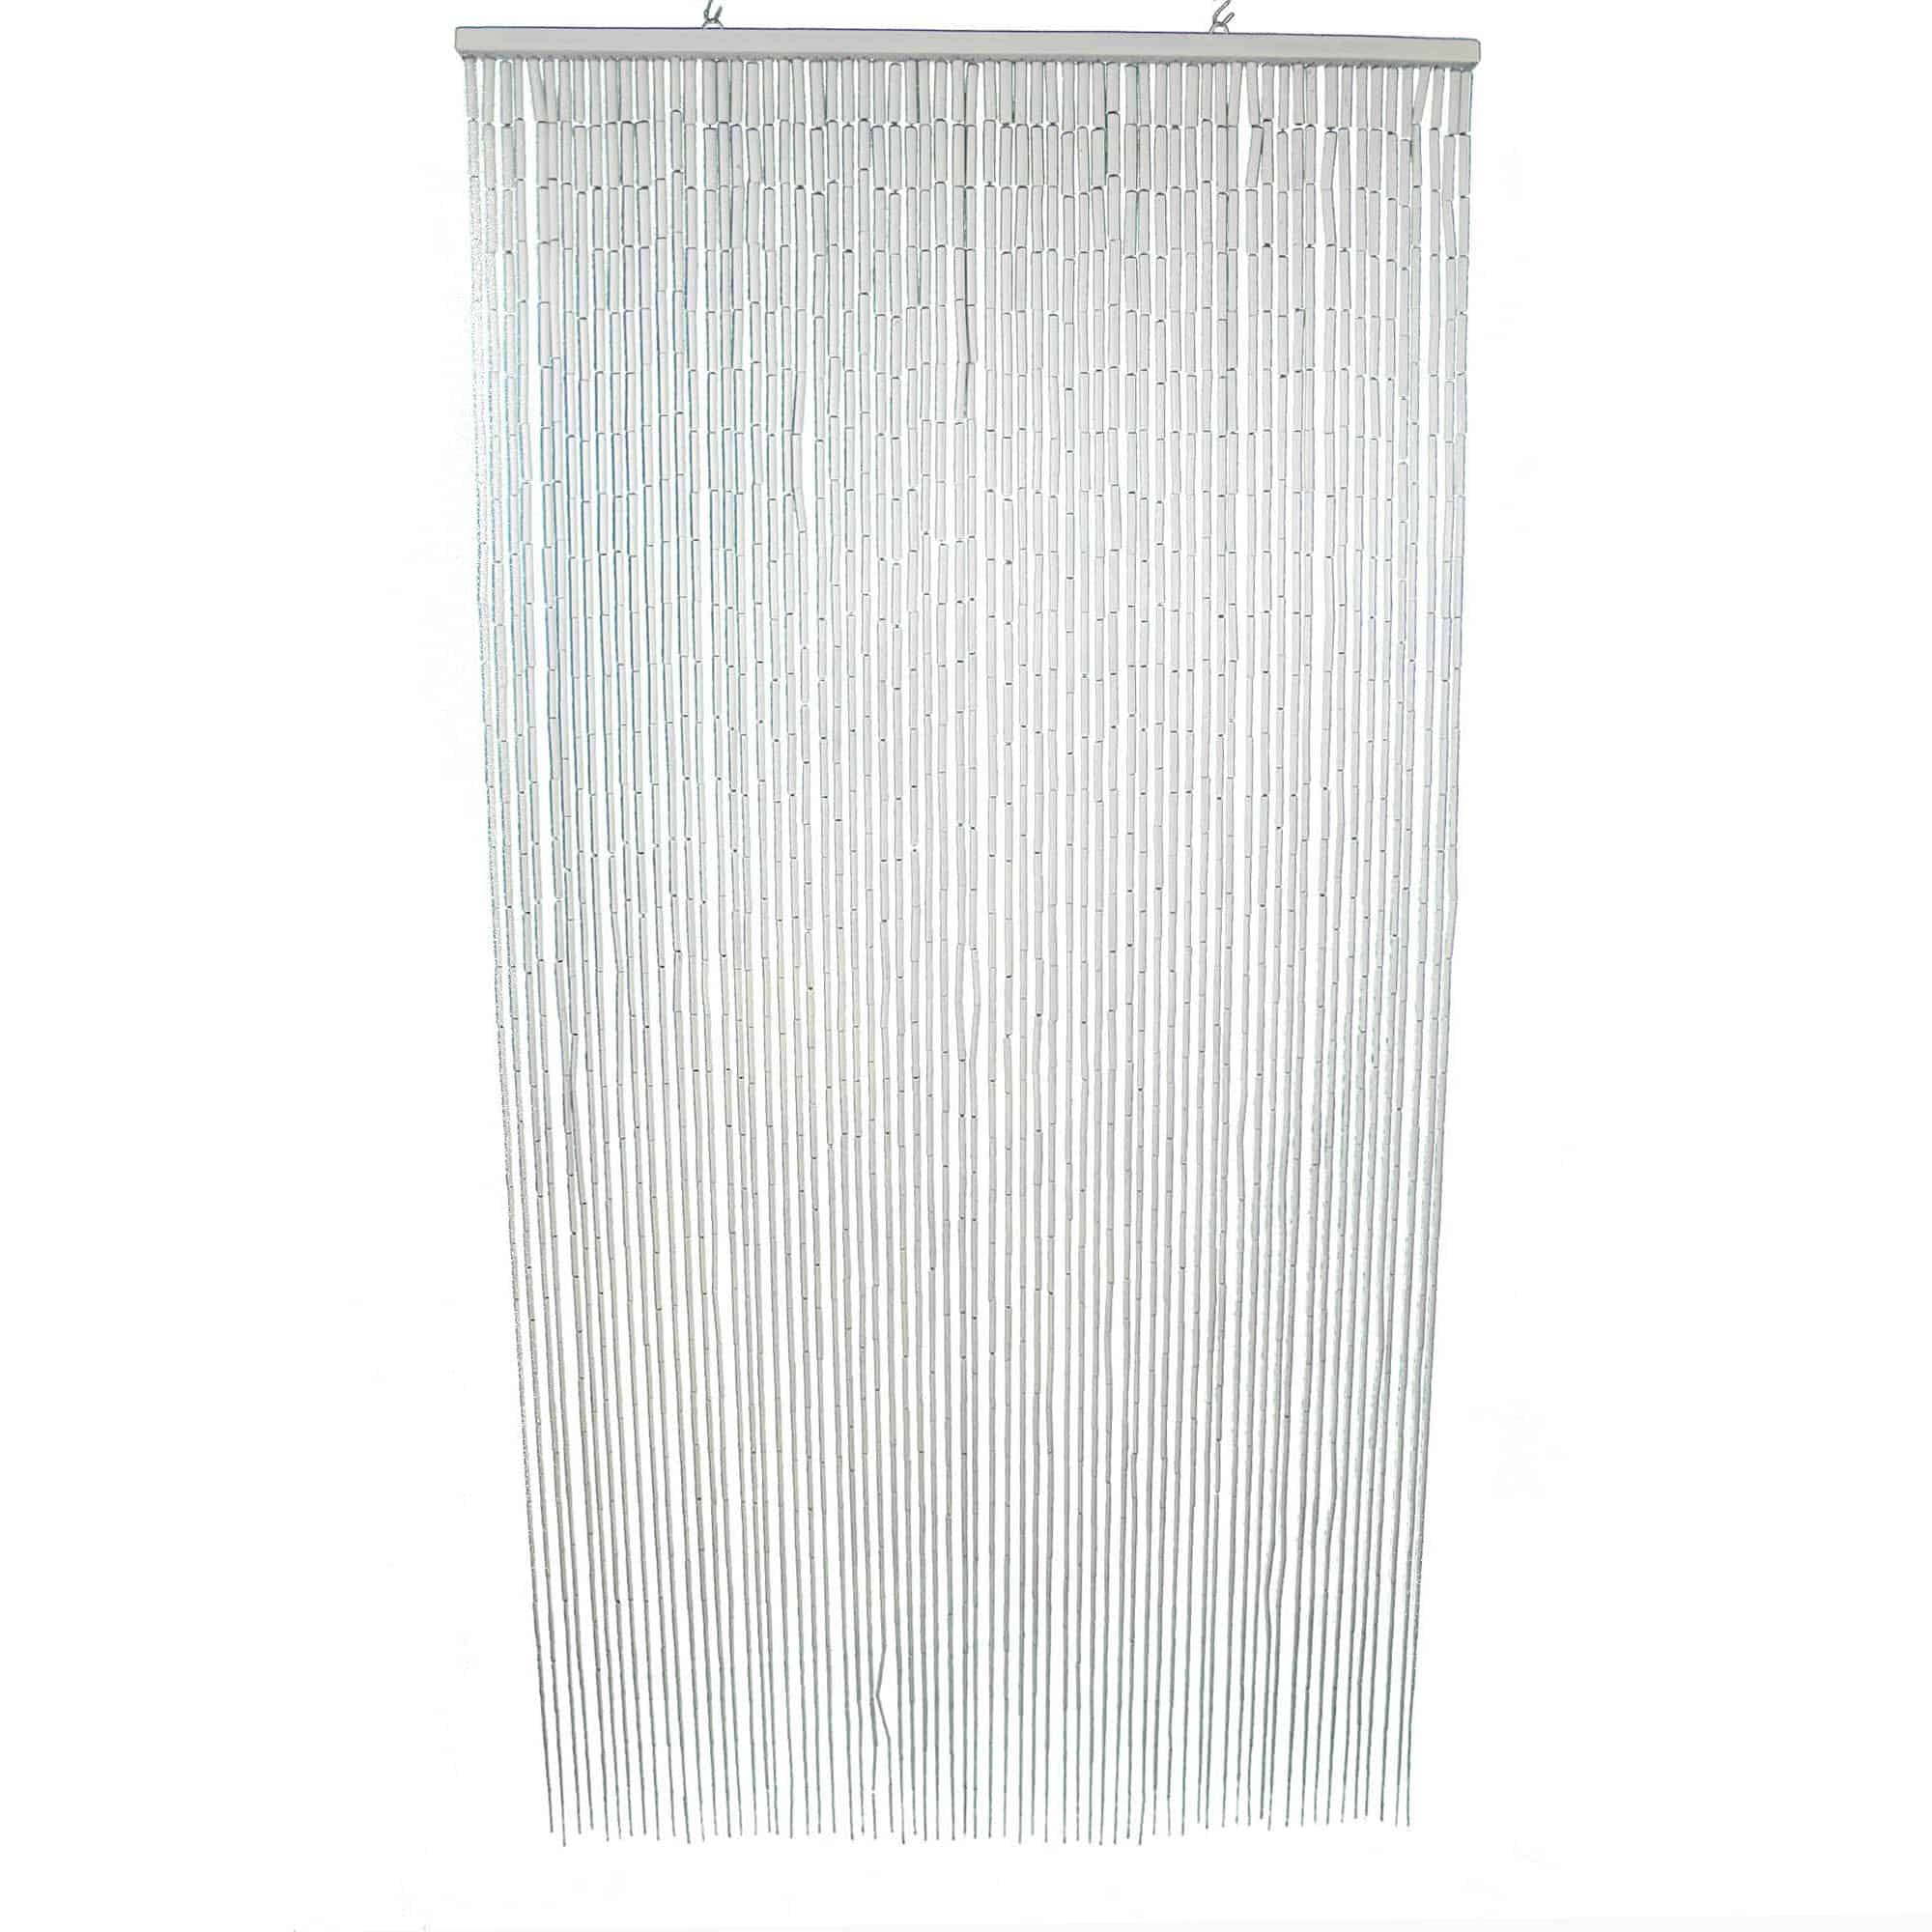 Evideco Wooden Sticks Beaded Curtain Doorway 65 Strings Natural 78.8"H x 35.5"W 